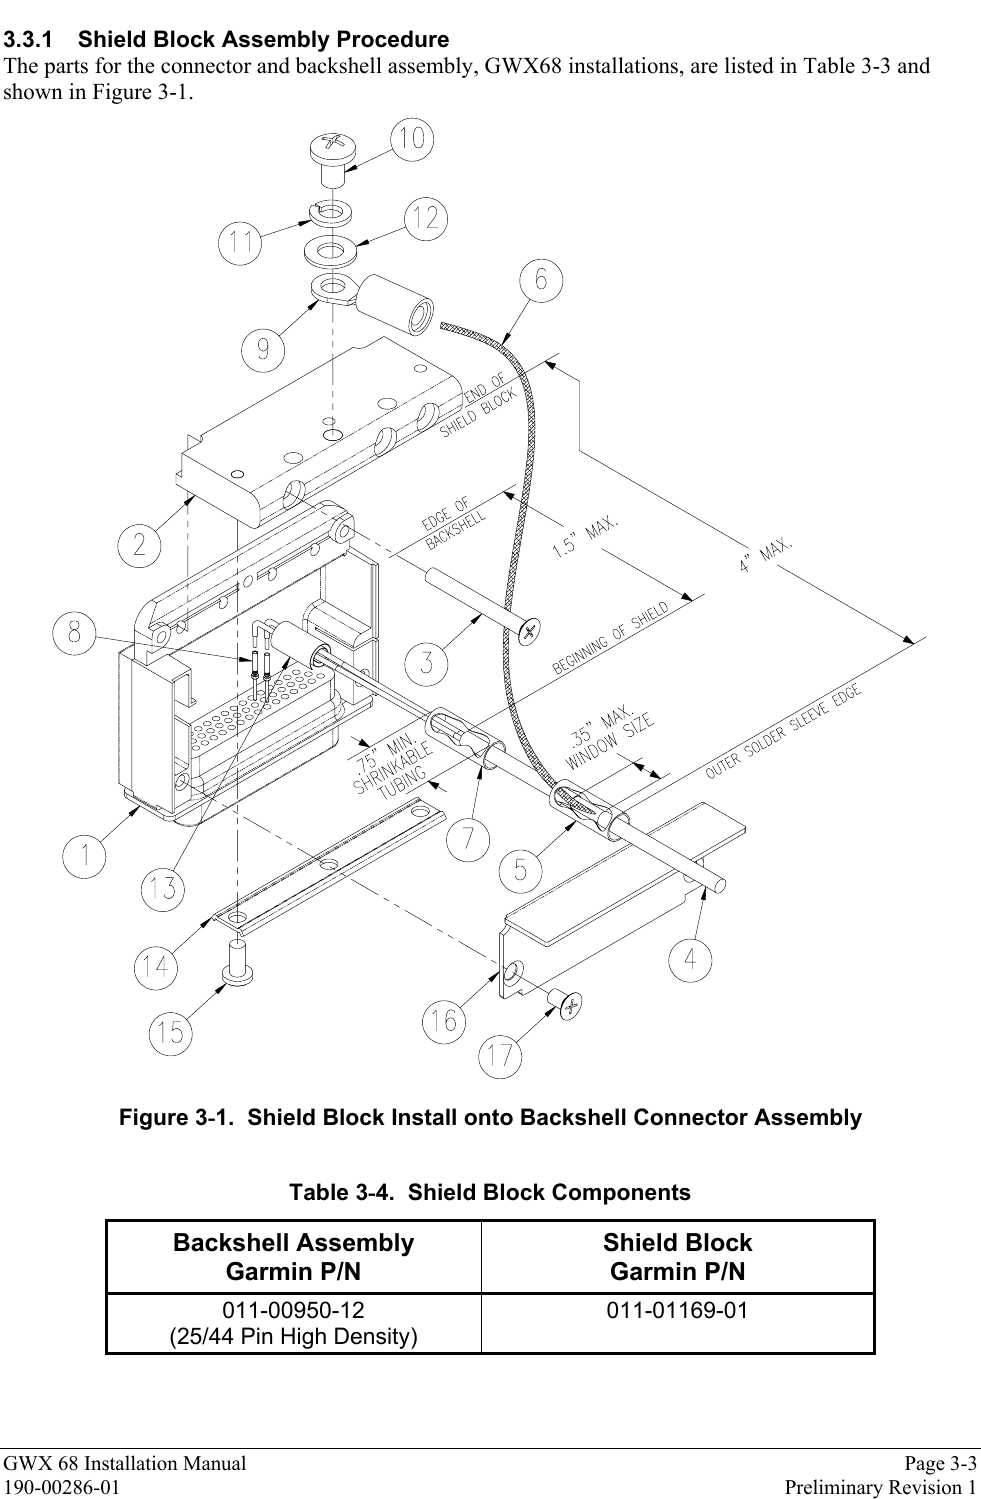 GWX 68 Installation Manual Page 3-3190-00286-01 Preliminary Revision 13.3.1  Shield Block Assembly ProcedureThe parts for the connector and backshell assembly, GWX68 installations, are listed in Table 3-3 andshown in Figure 3-1.Figure 3-1.  Shield Block Install onto Backshell Connector AssemblyTable 3-4.  Shield Block ComponentsBackshell AssemblyGarmin P/NShield BlockGarmin P/N011-00950-12(25/44 Pin High Density)011-01169-01